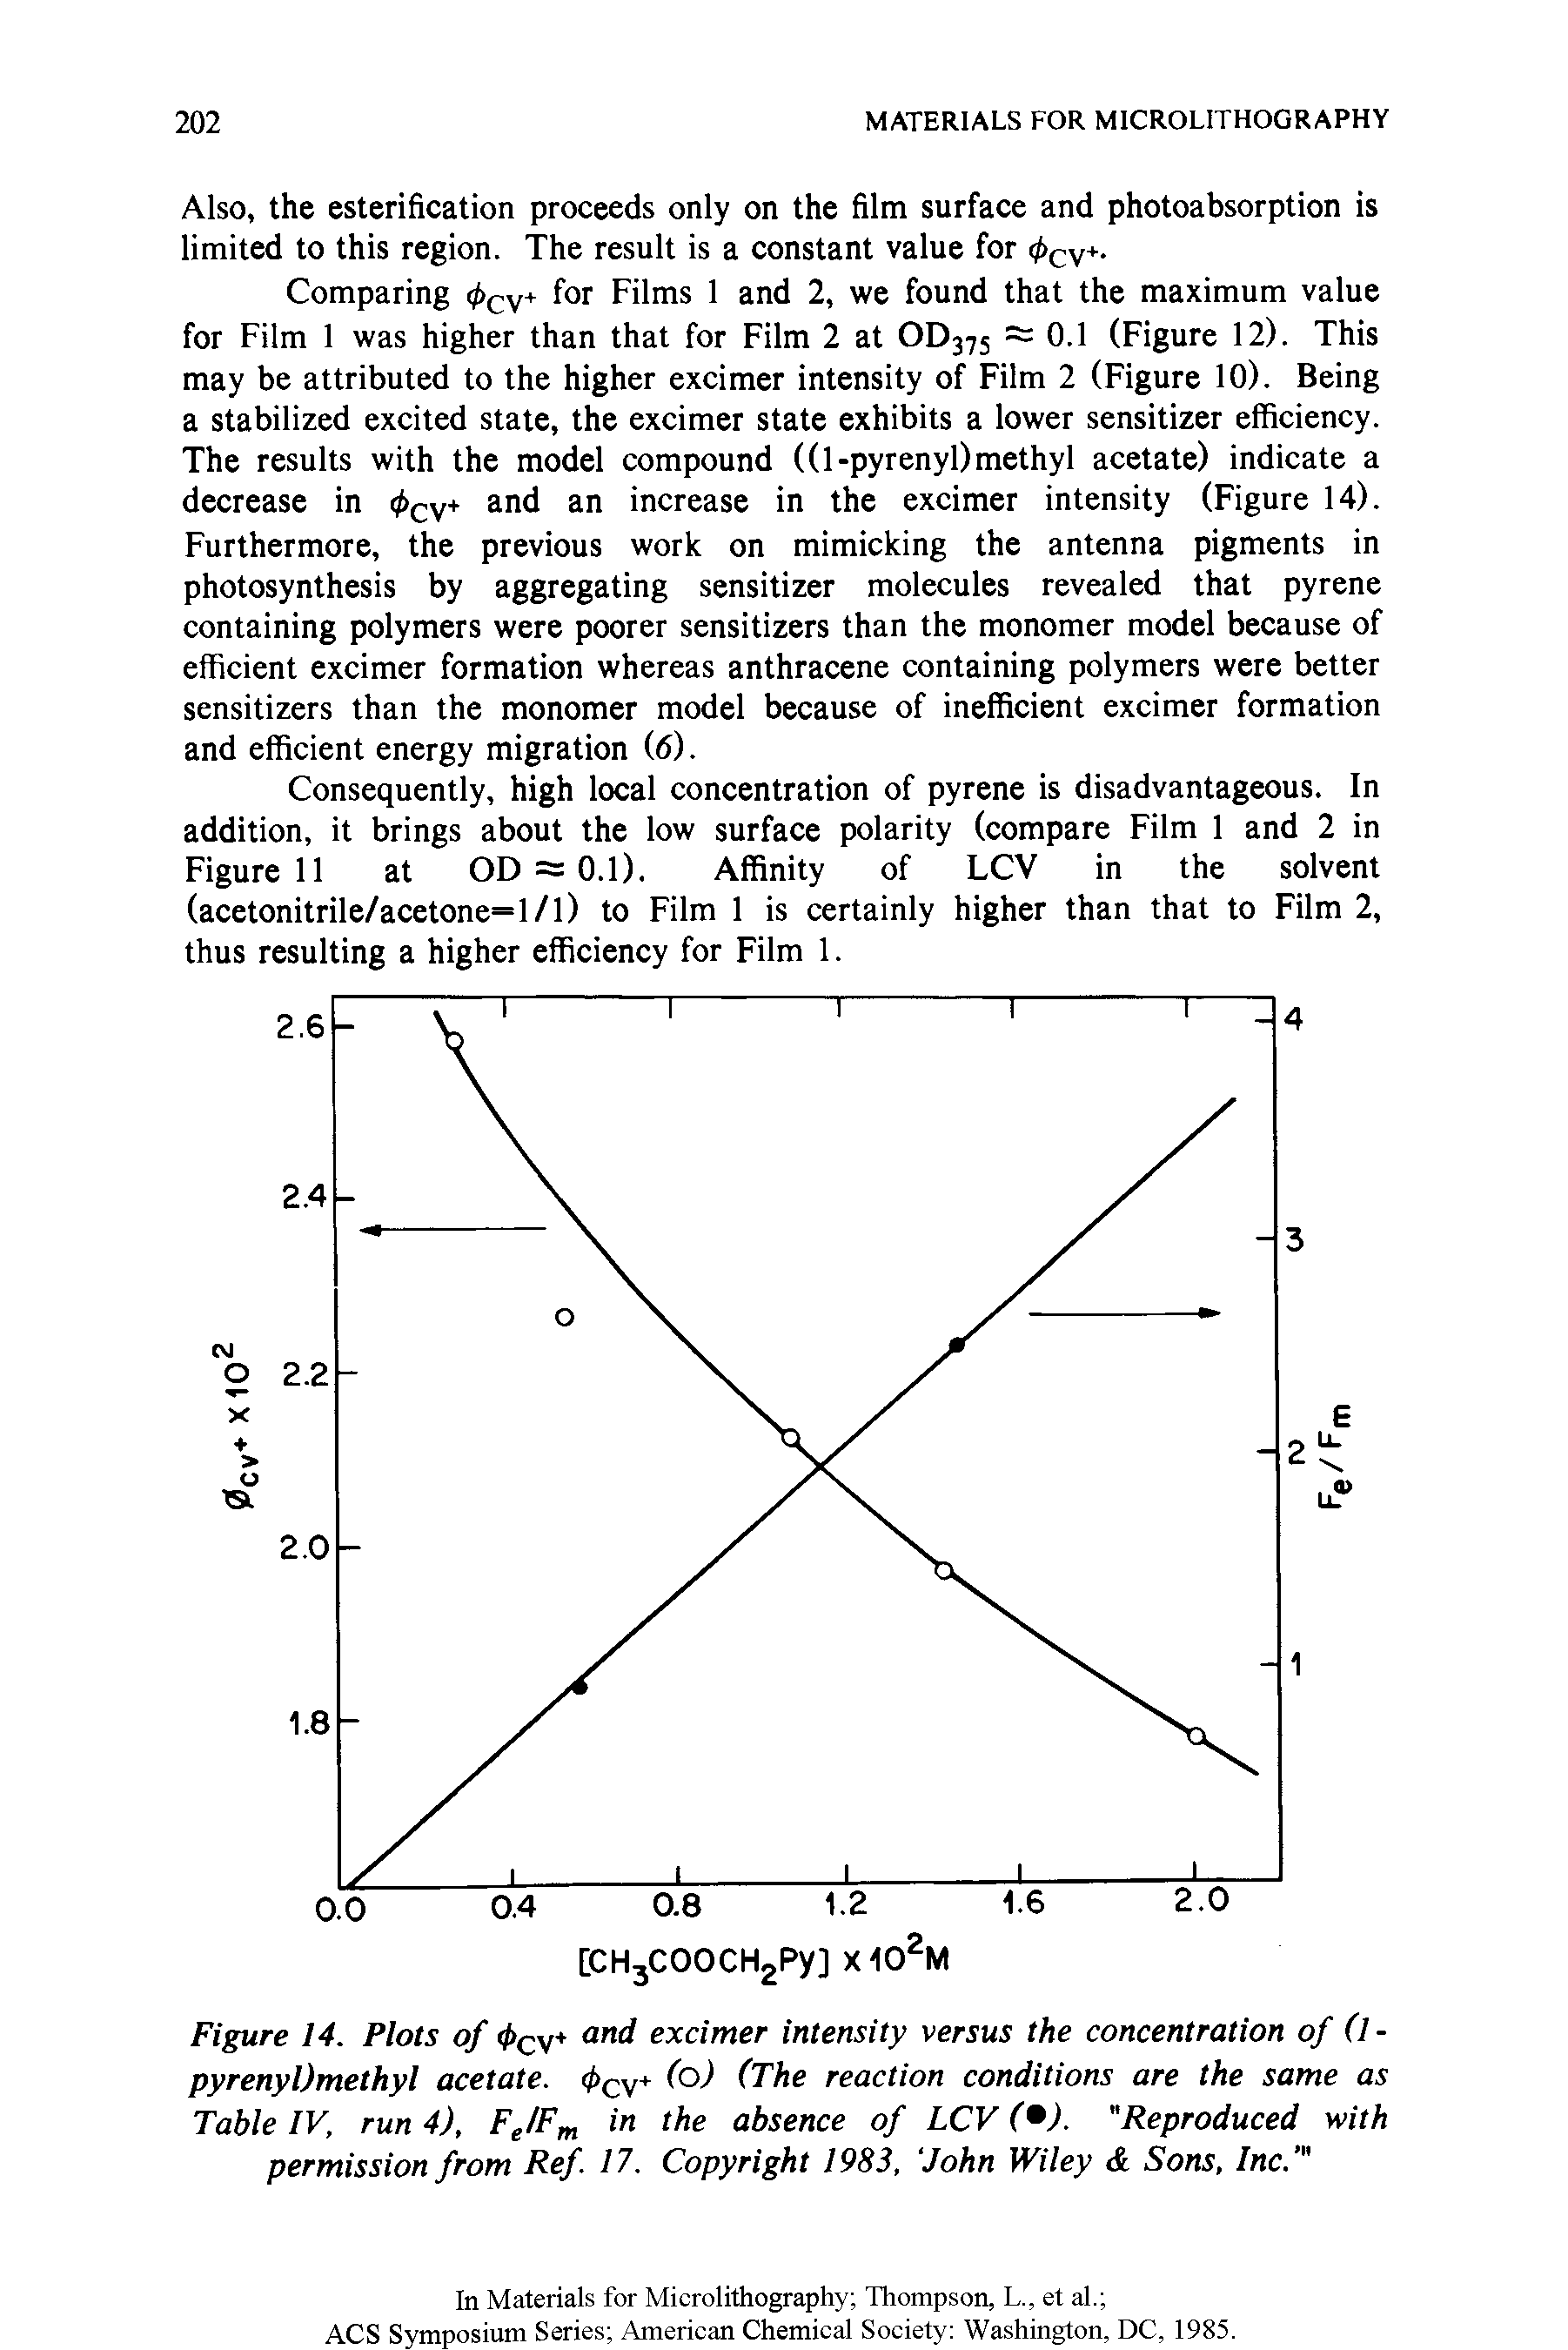 Figure 14. Plots of + and excimer intensity versus the concentration of (l -pyrenyUmethyl acetate. < cv+ (o) (The reaction conditions are the same as Table IV, run 4), Fe/Fm in the absence of LCV ( ). "Reproduced with permission from Ref 17. Copyright 1983, John Wiley Sons, Inc. "...